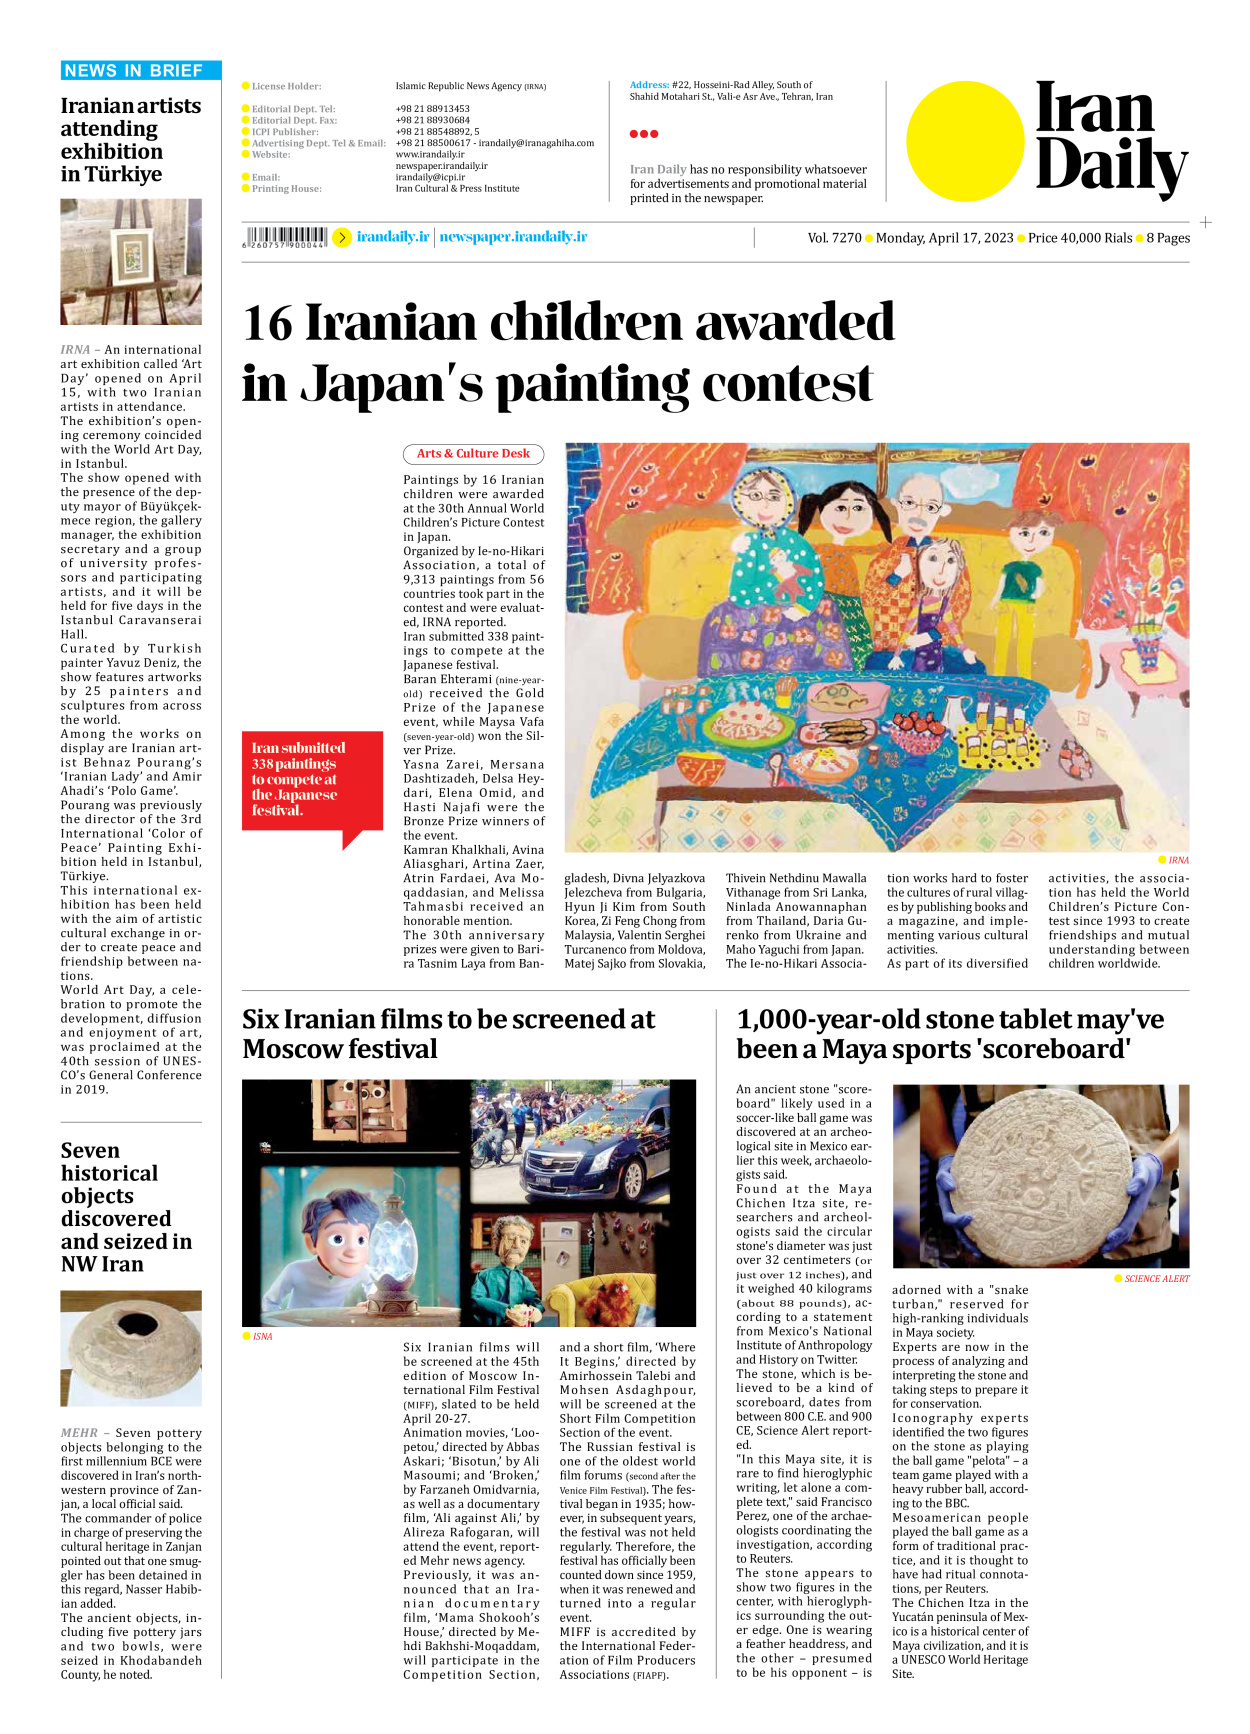 Iran Daily - Number Seven Thousand Two Hundred and Seventy - 17 April 2023 - Page 8